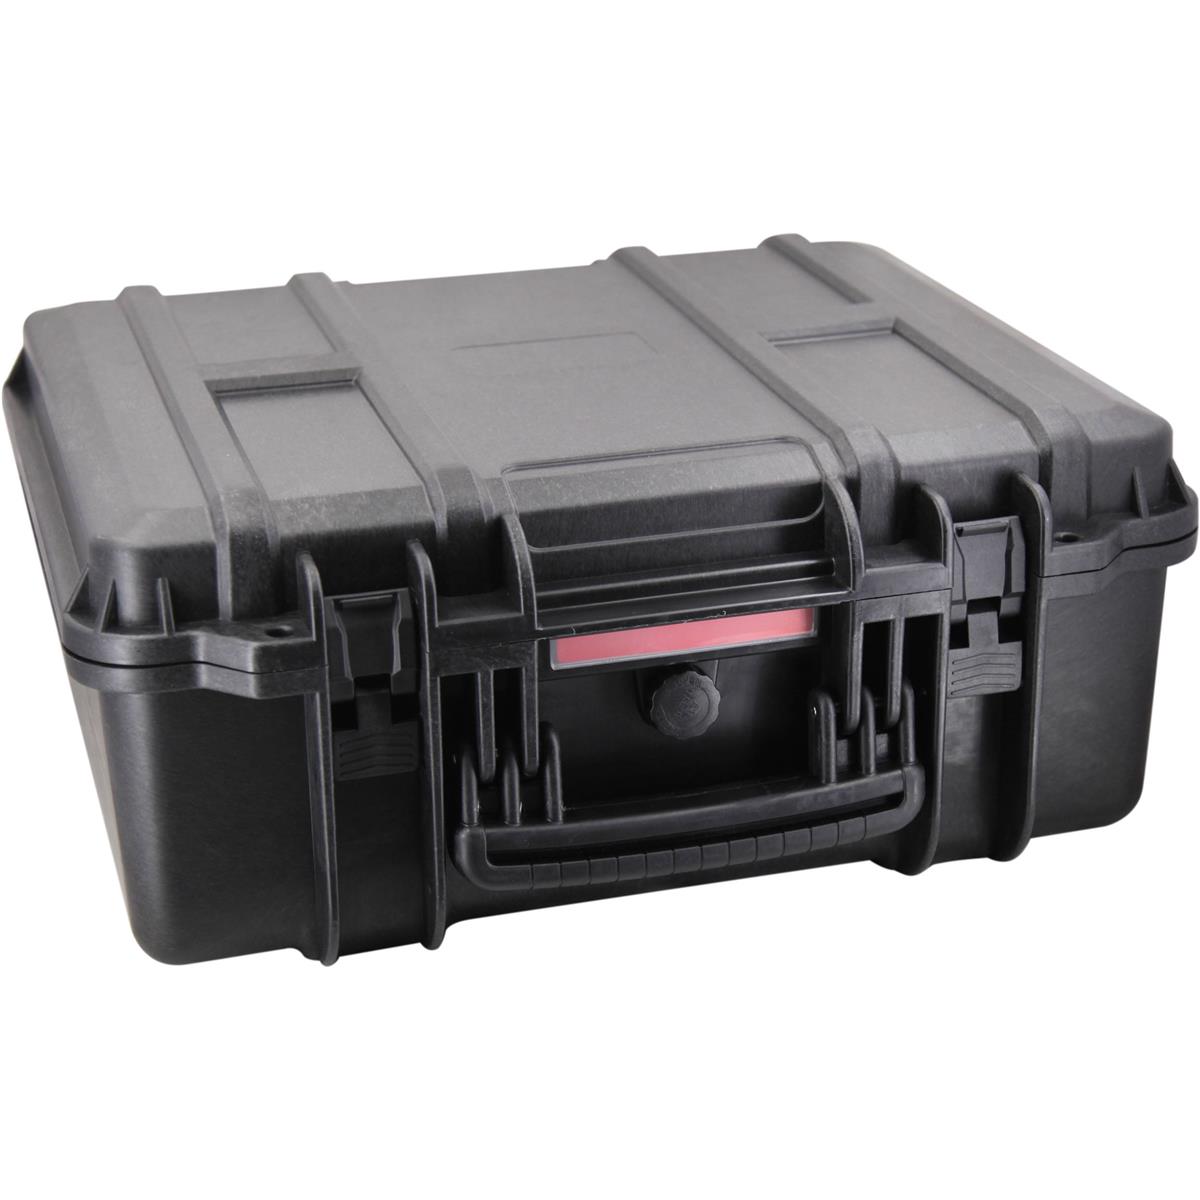 Image of FX Lion FX-SKYB01 Case for Skypower Power Solution